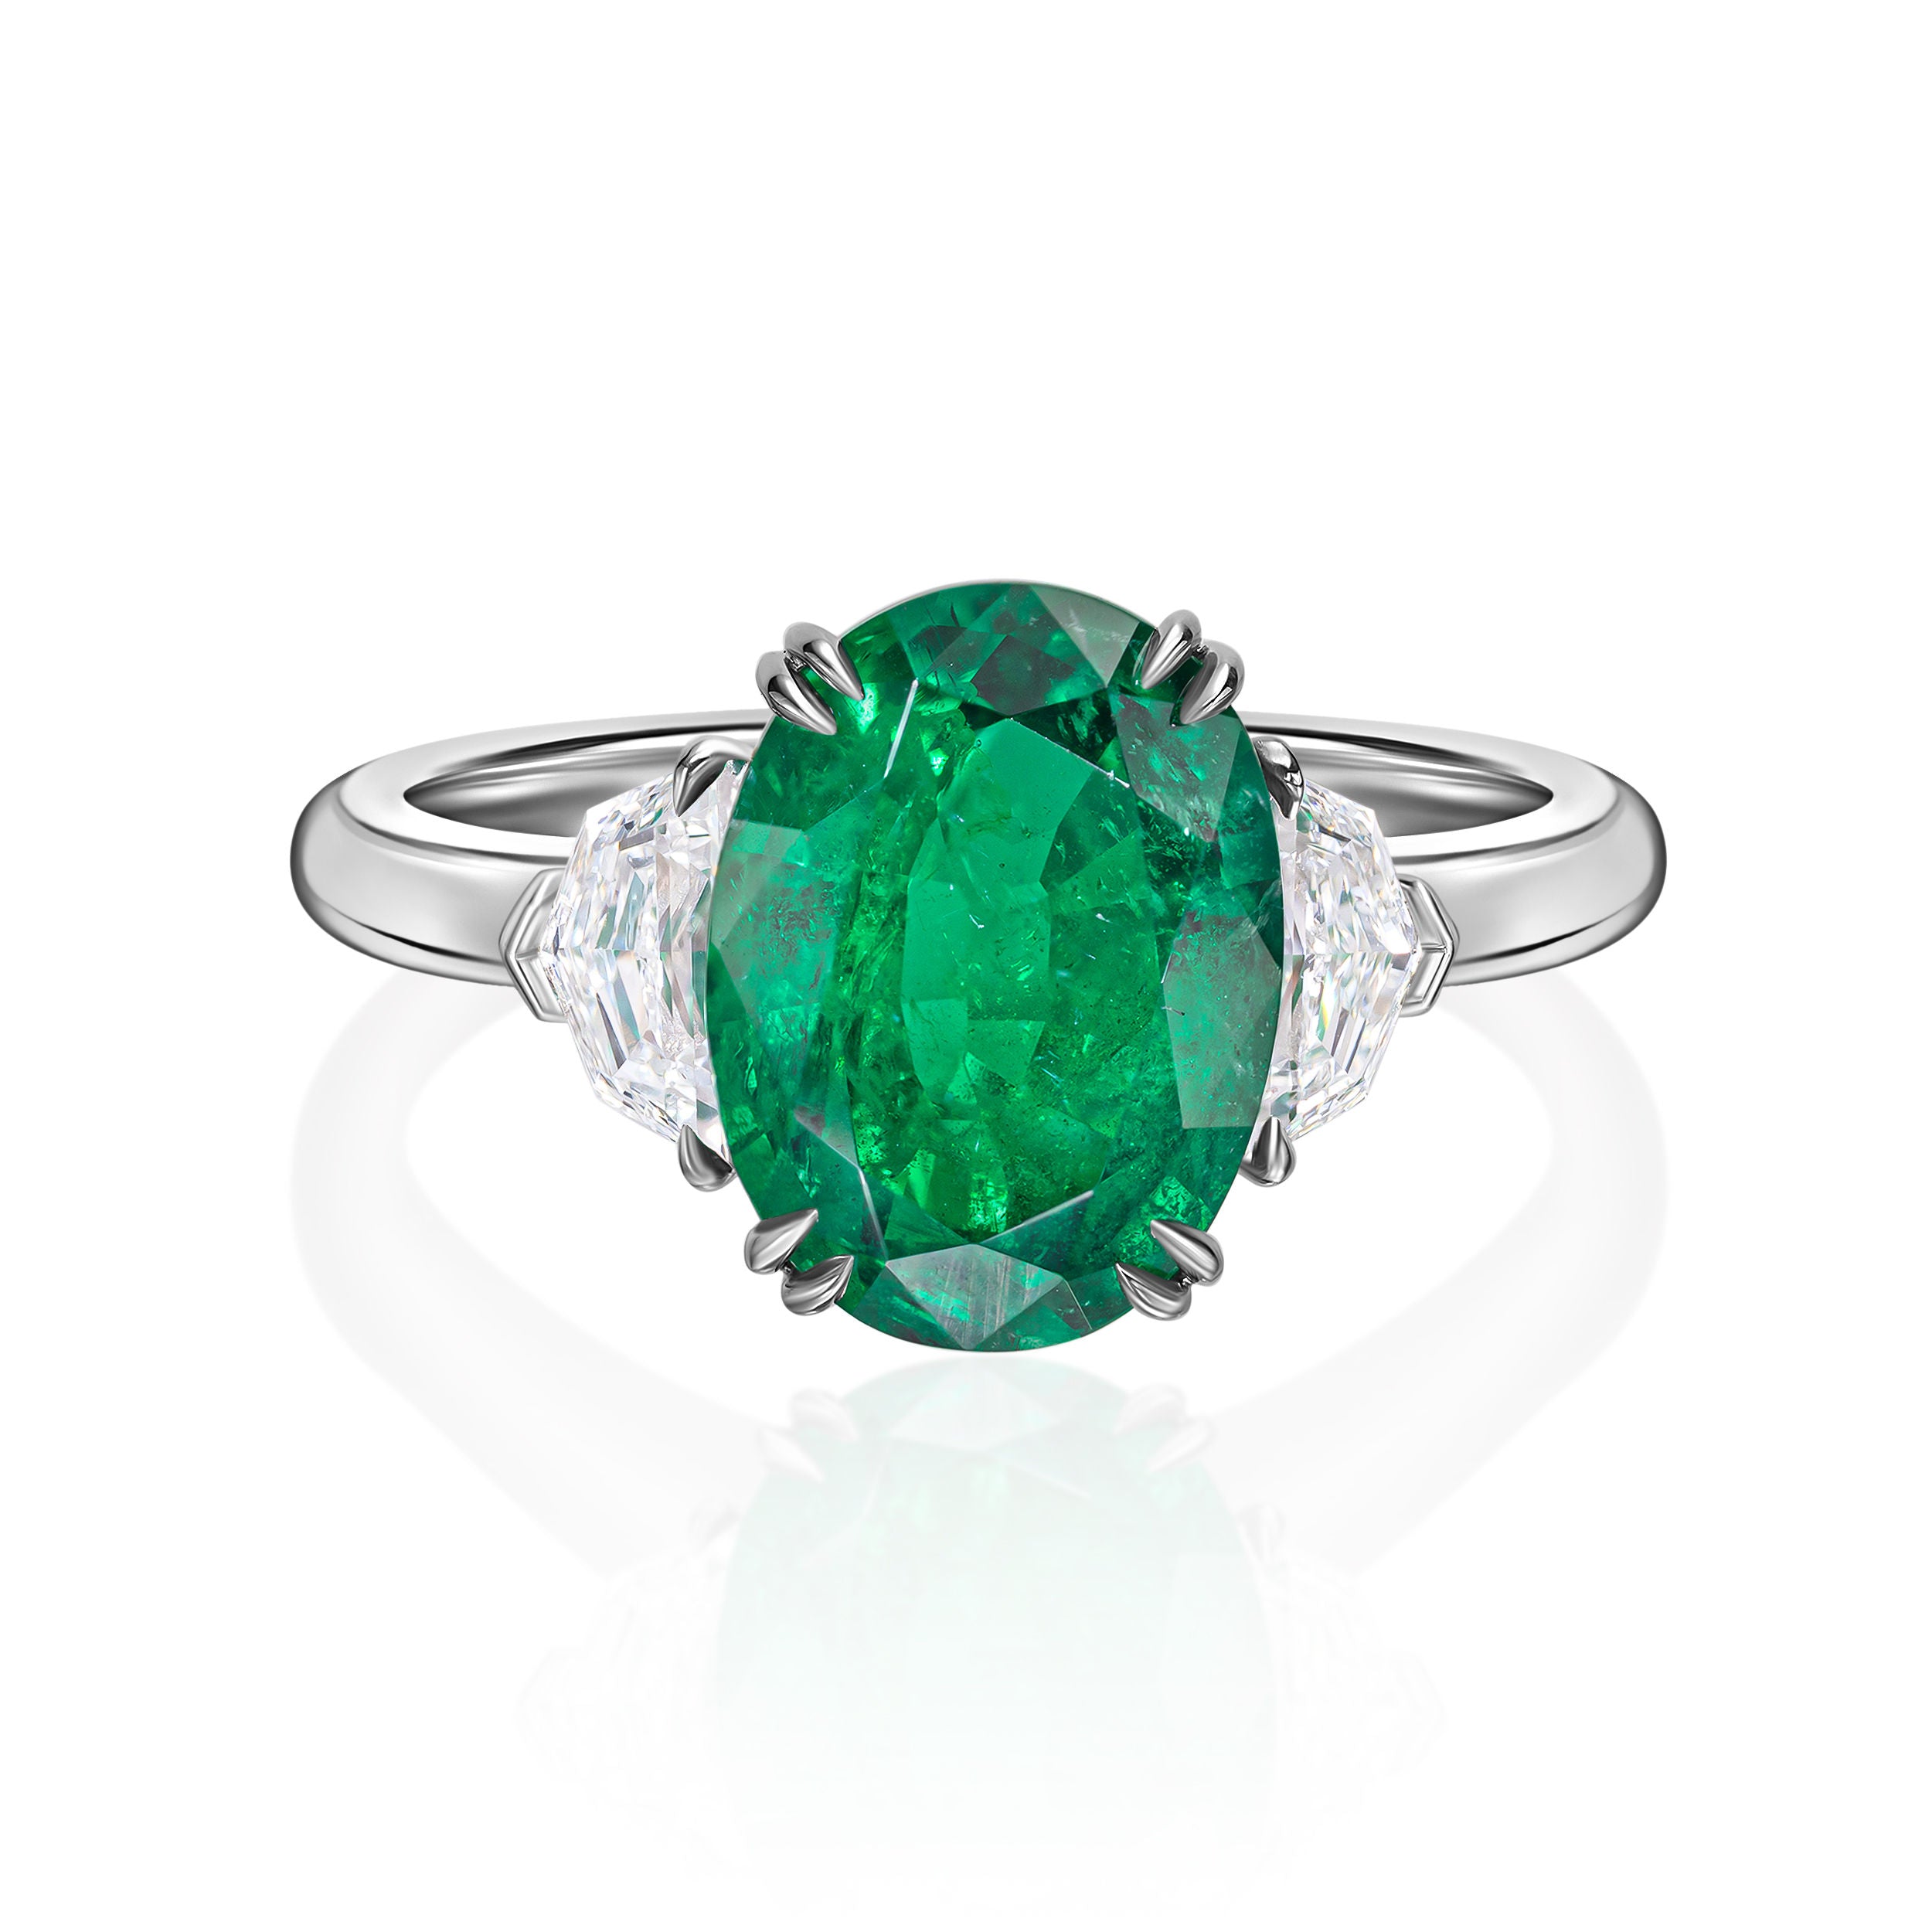 Oval Emerald Ring with Cadillac Shapes - 3.94ct TW